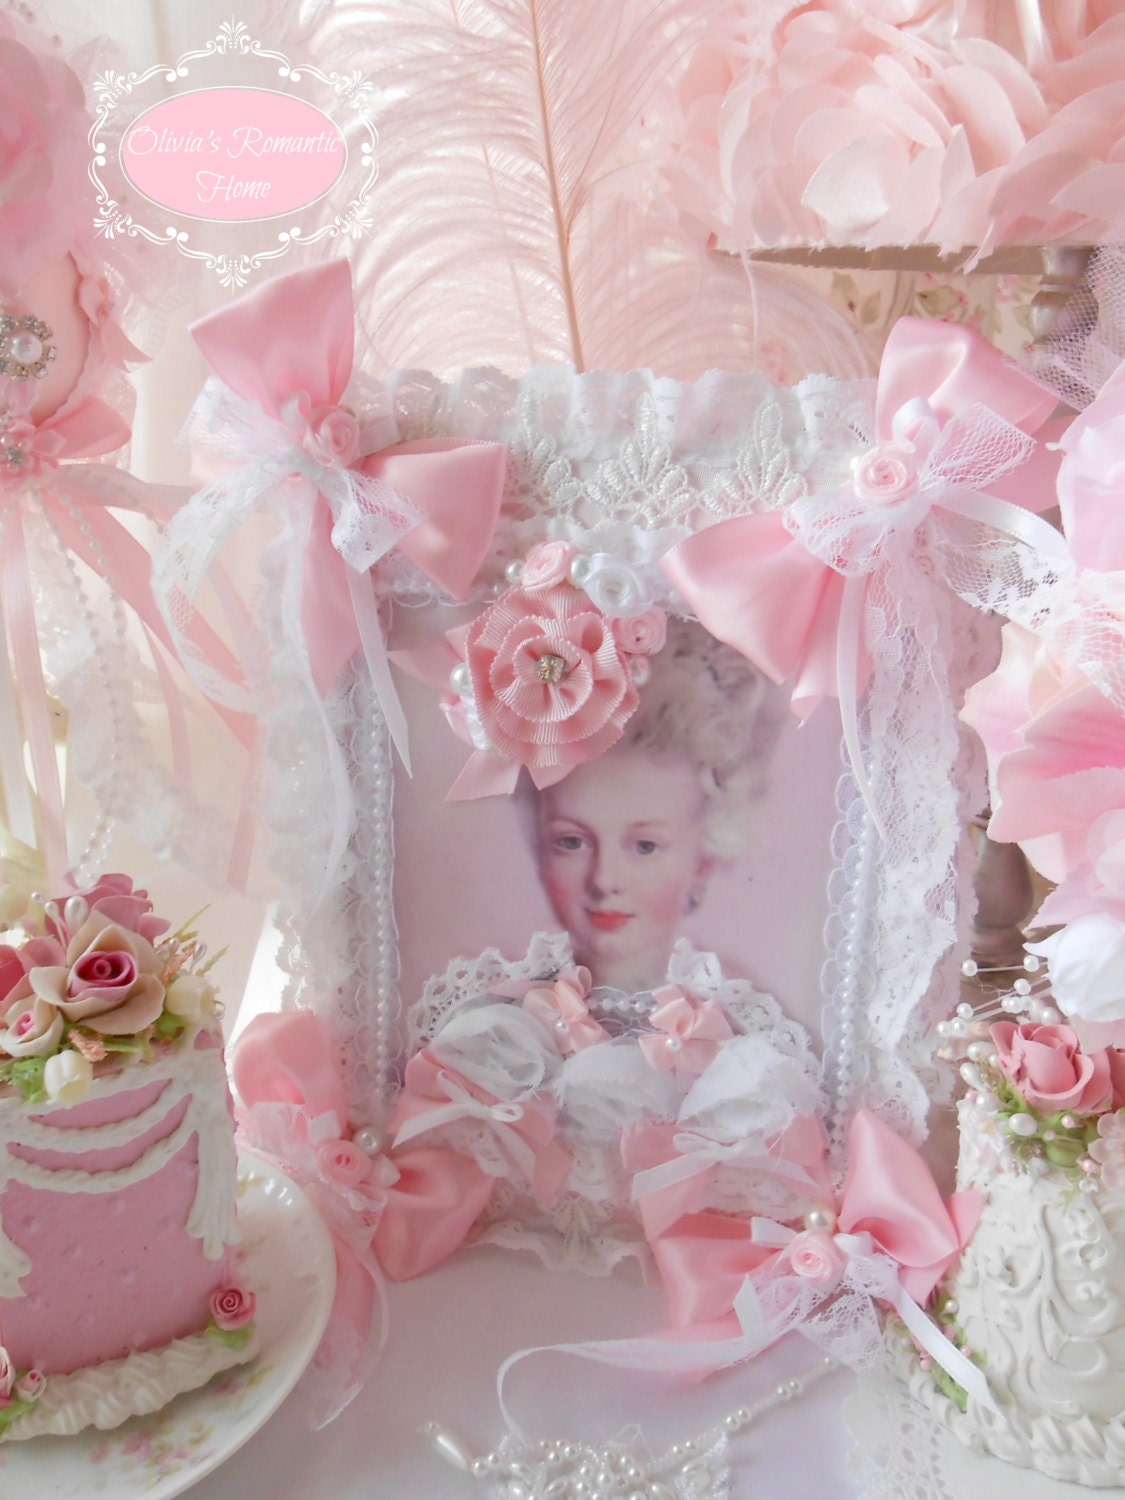 Pink Princess Victorian Lady Marie Antoinette Journal Coffee Table Book Pink Satin Rose Bridal Lace Shabby Chic French Altered art